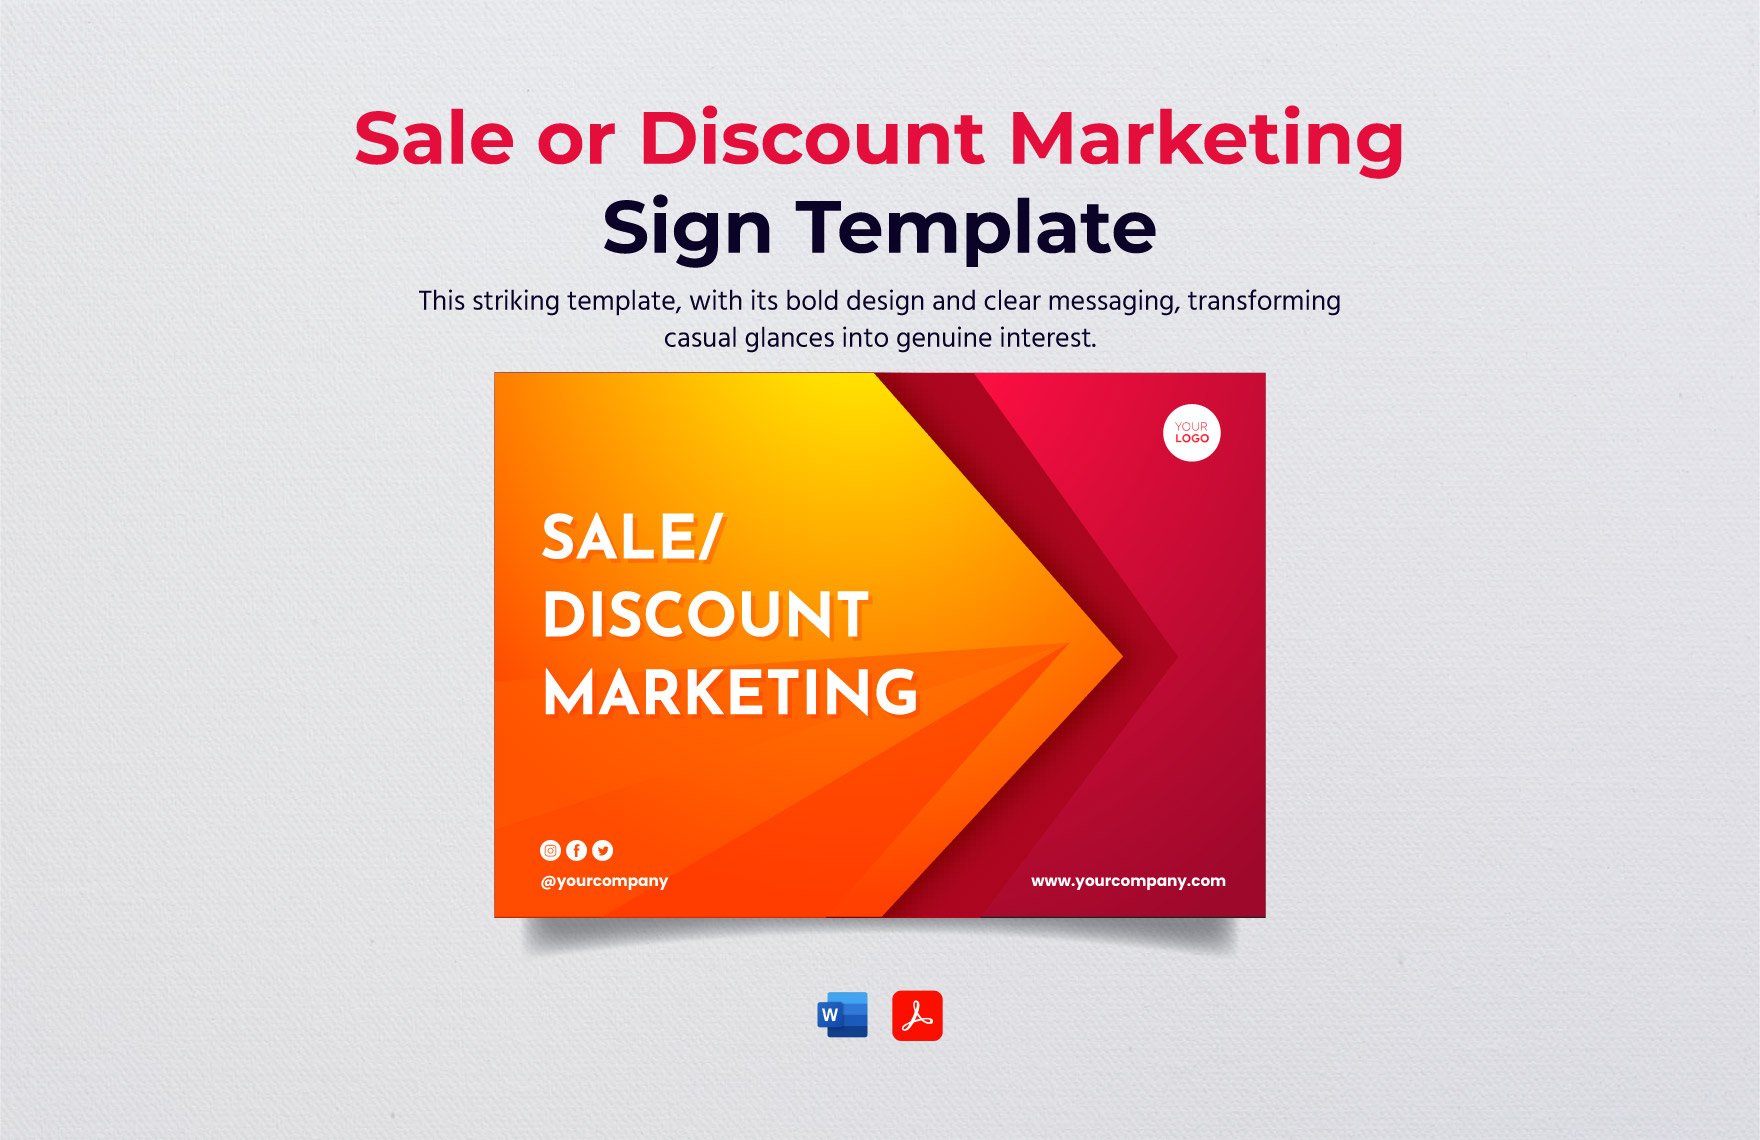 Sale or Discount Marketing Sign Template